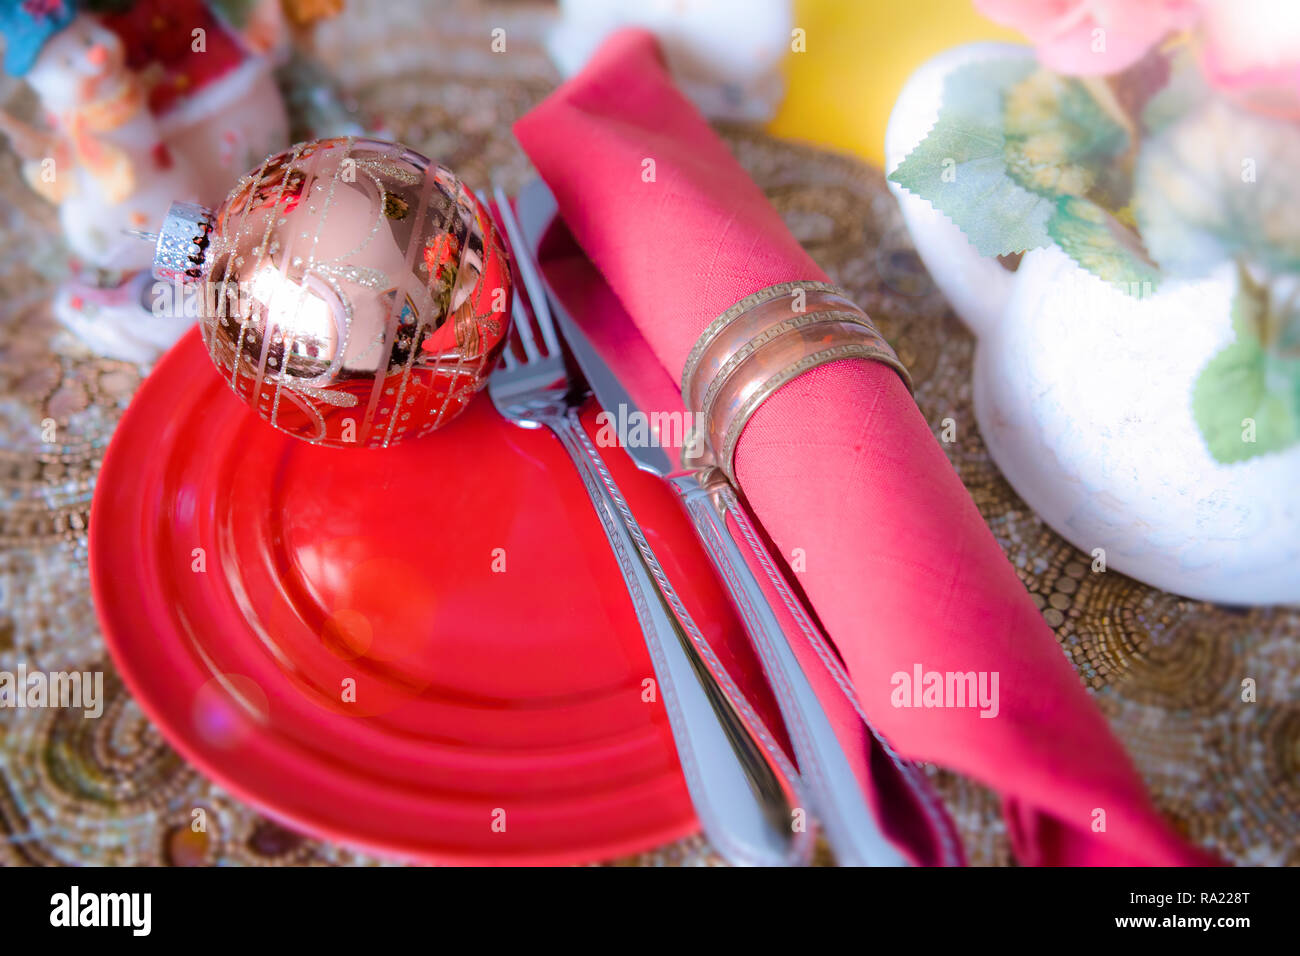 The table is set for the Christmas party. A golden ball is placed on the red dish. Stock Photo